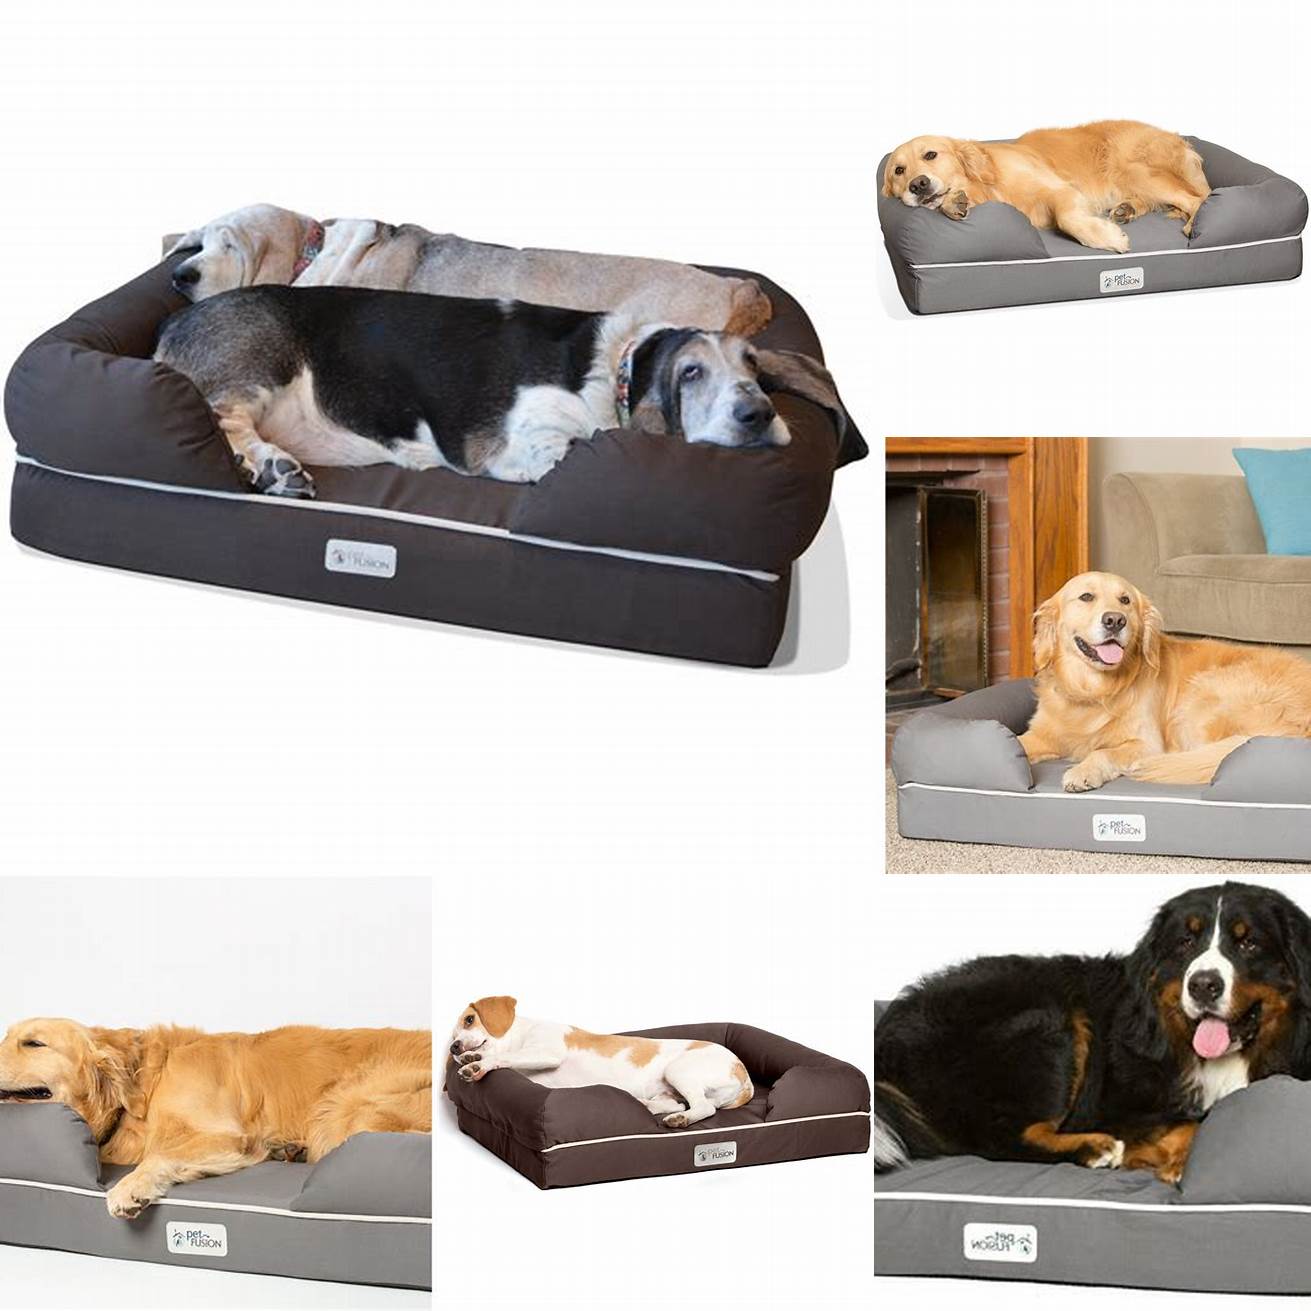 The PetFusion Ultimate Dog Bed is a comfortable and stylish option that features a memory foam base and a water-resistant cover